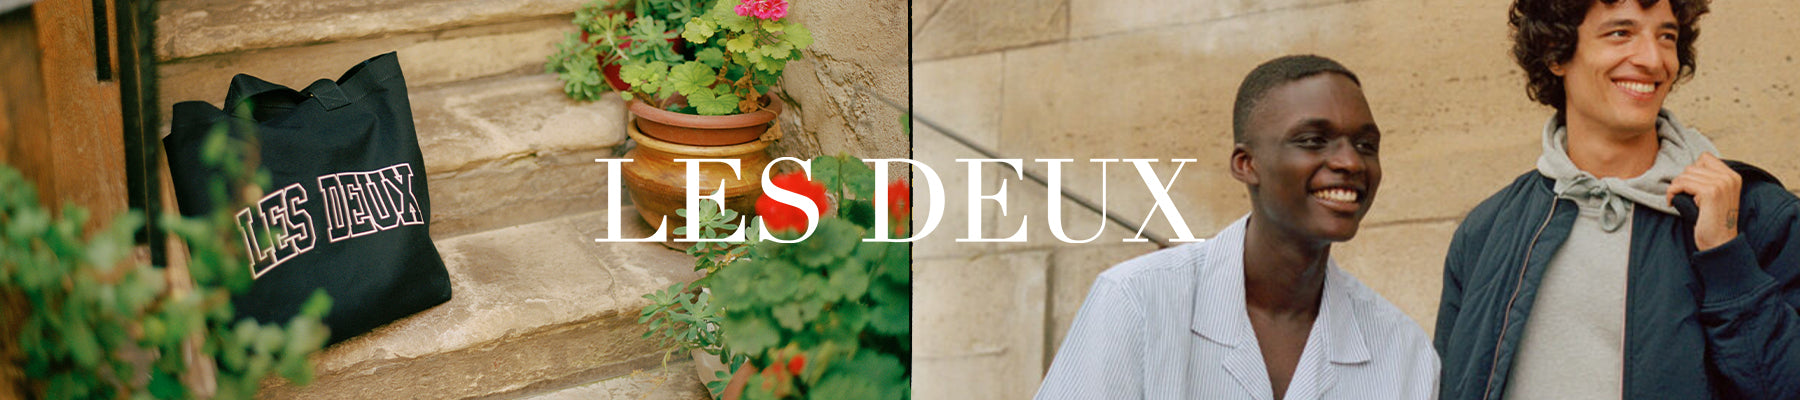 The brand Les Deux Caps Selection is known for its dedication to quality and craftsmanship.